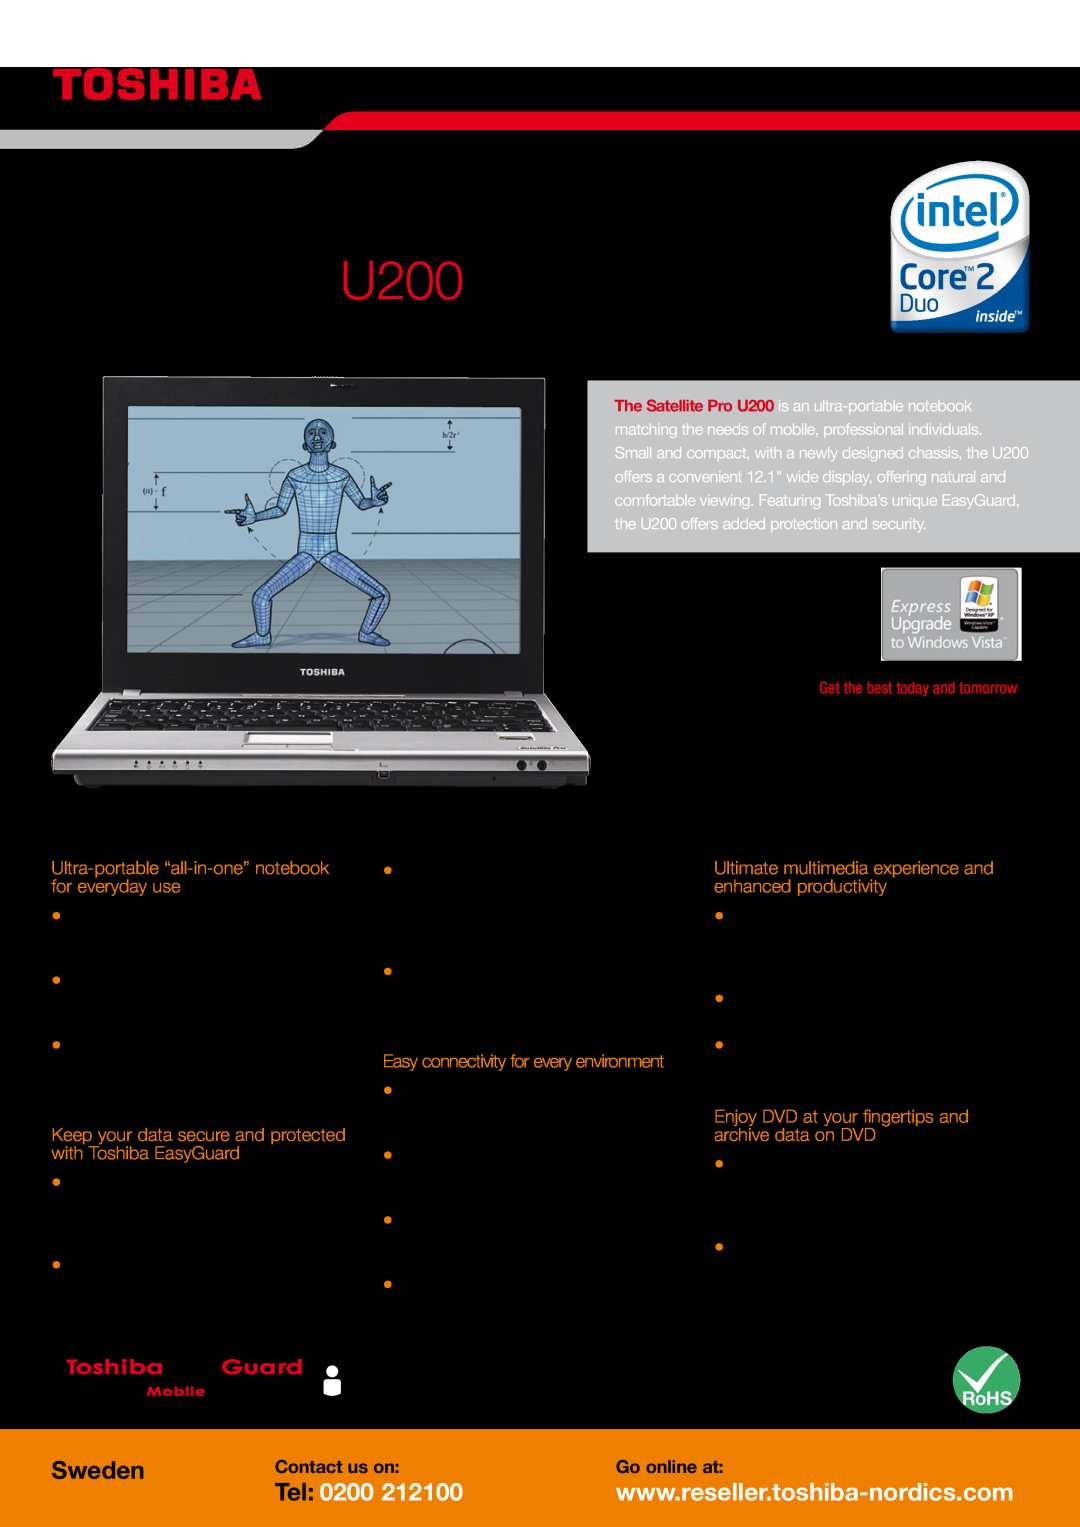 Toshiba U200 manual Sweden, Tel 0200, Toshiba recommends Genuine Windows XP Professional, Contact us on, Go online at 